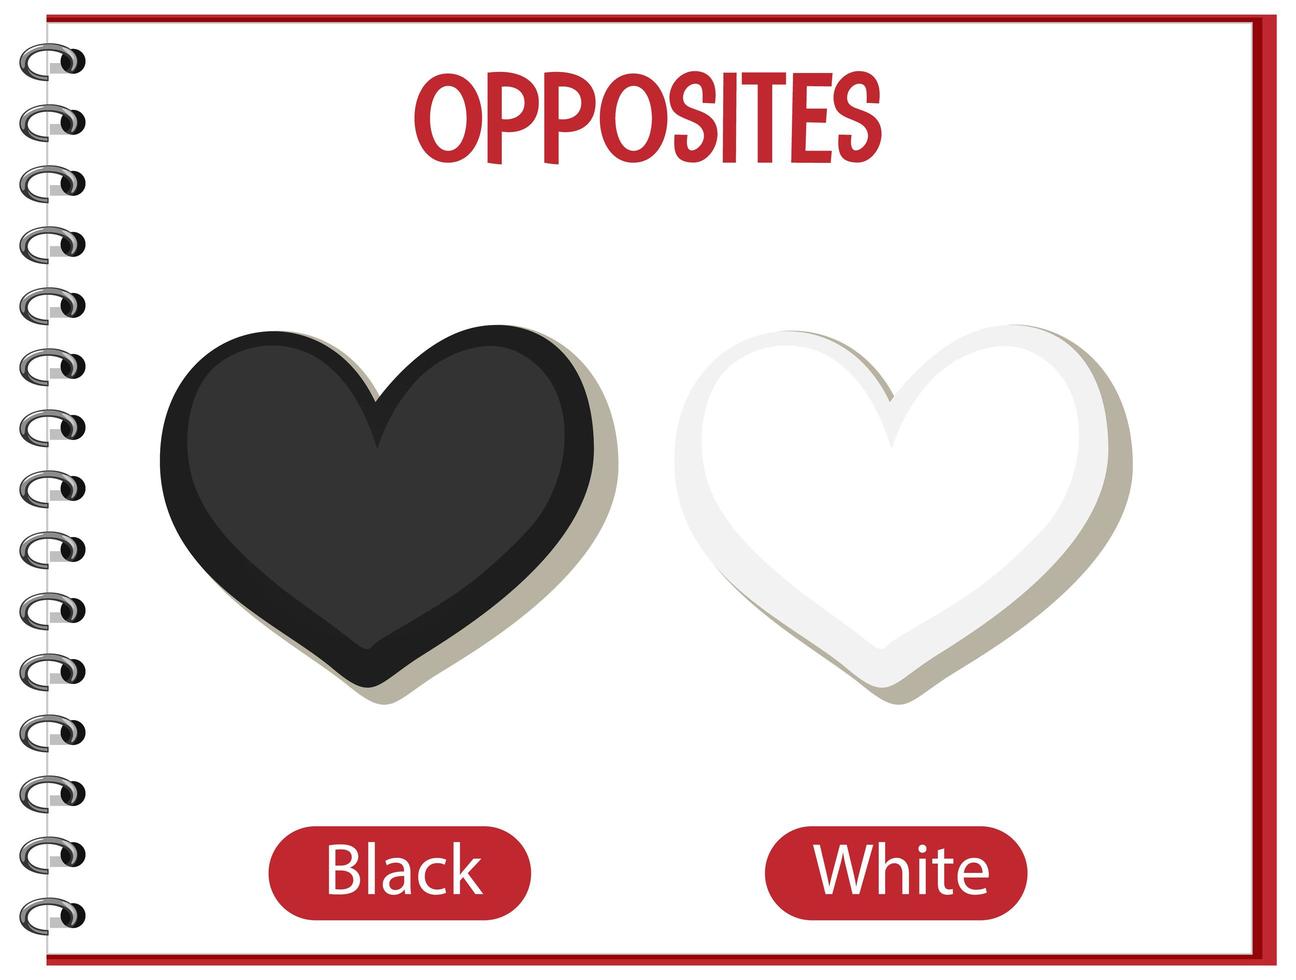 Opposite words with black and white vector